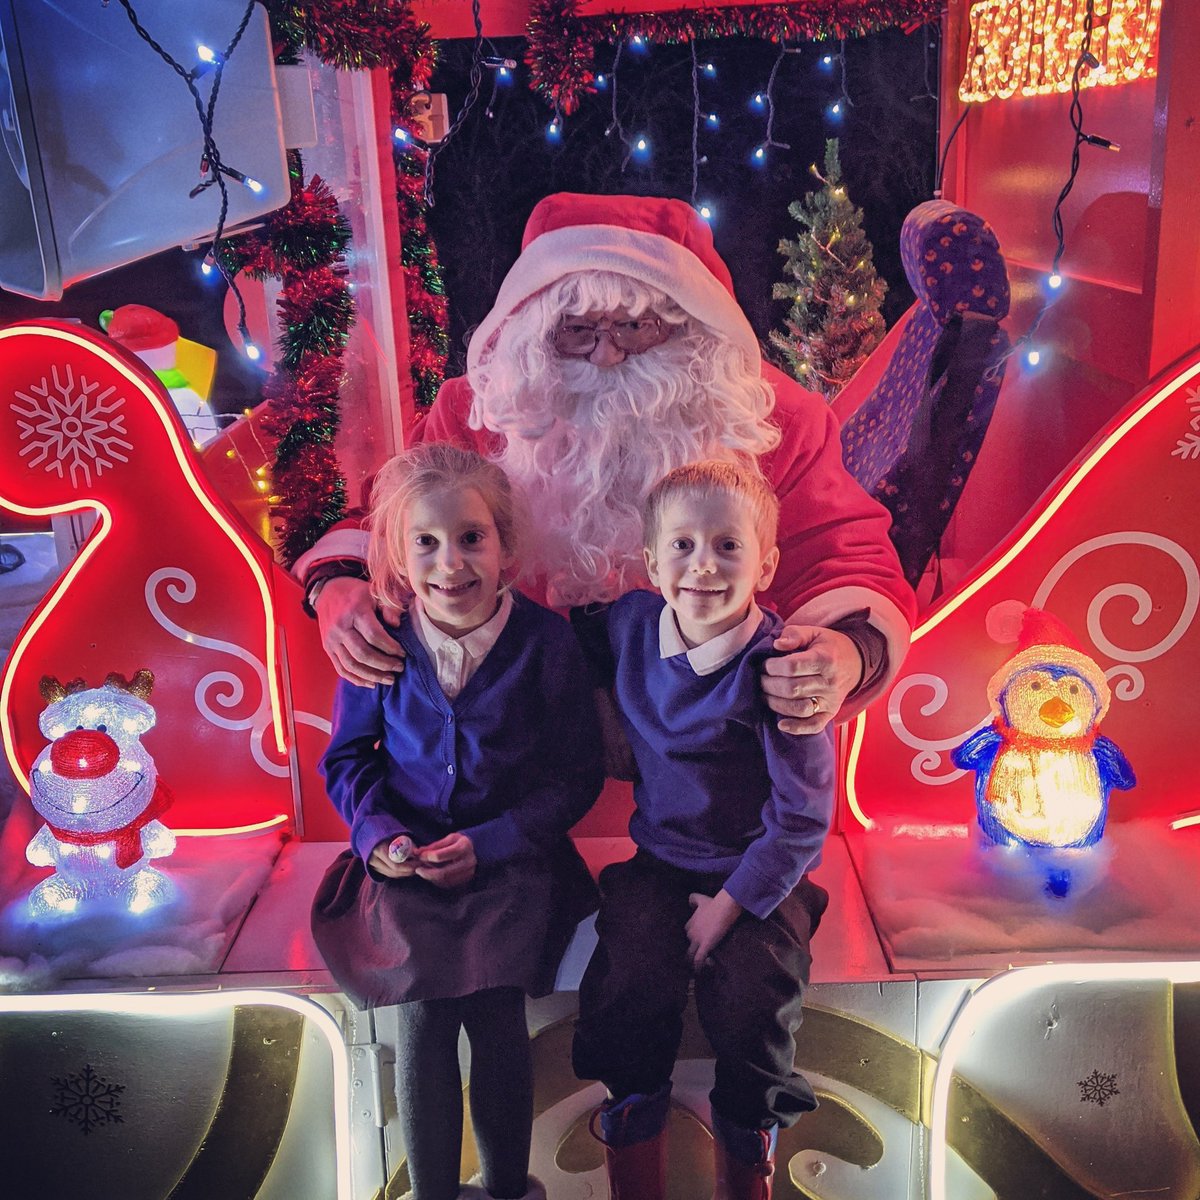 Santa came down our street and knocked on the door. Kids thought it was brilliant and even got to sit on his sleigh.
Sadly Keira may has sickness bug so had to wave from the window xx
#santa #christmas #mykidsaremyworld #brotherandsisterlove